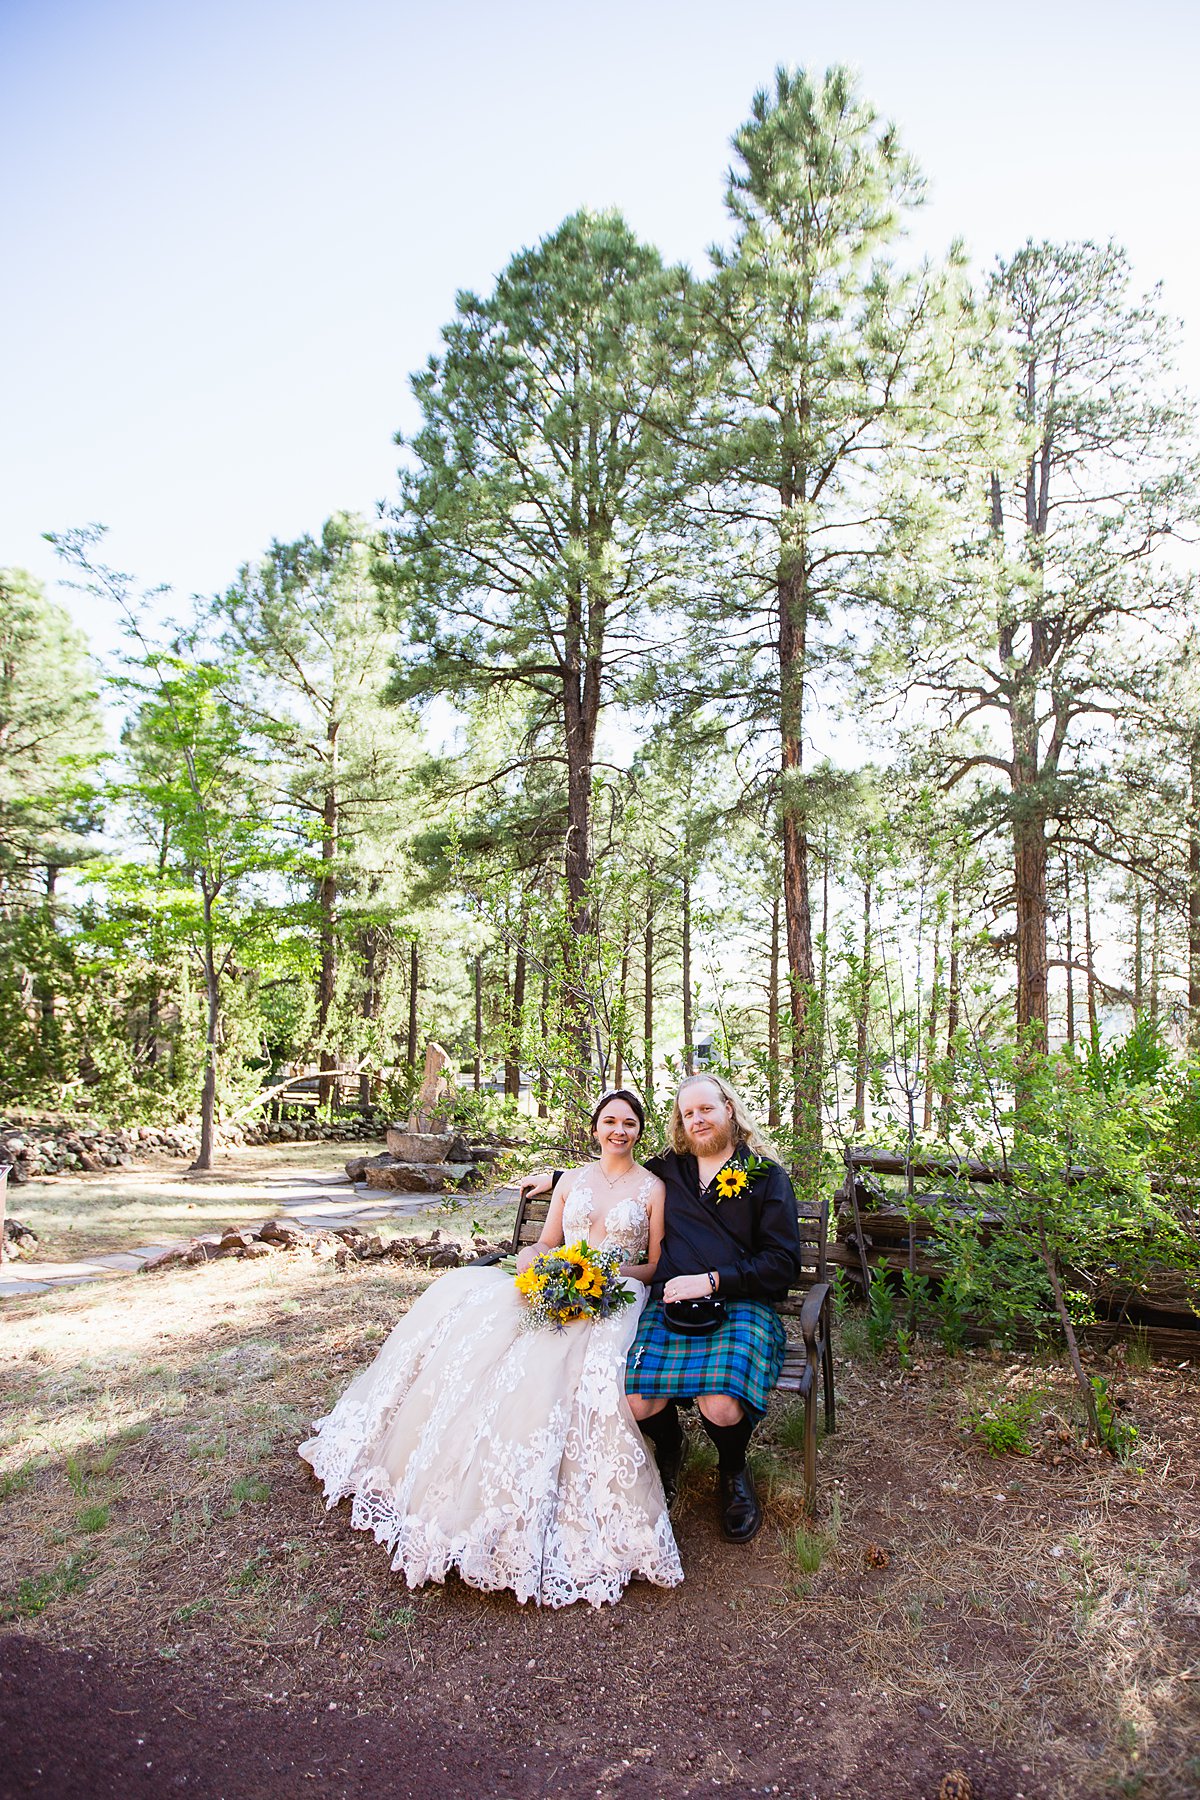 Bride and groom sit on a bench in the woods at the Riordan Mansion at their Scottish and Sunflower inspired wedding by Flagstaff wedding photographers PMA Photography.